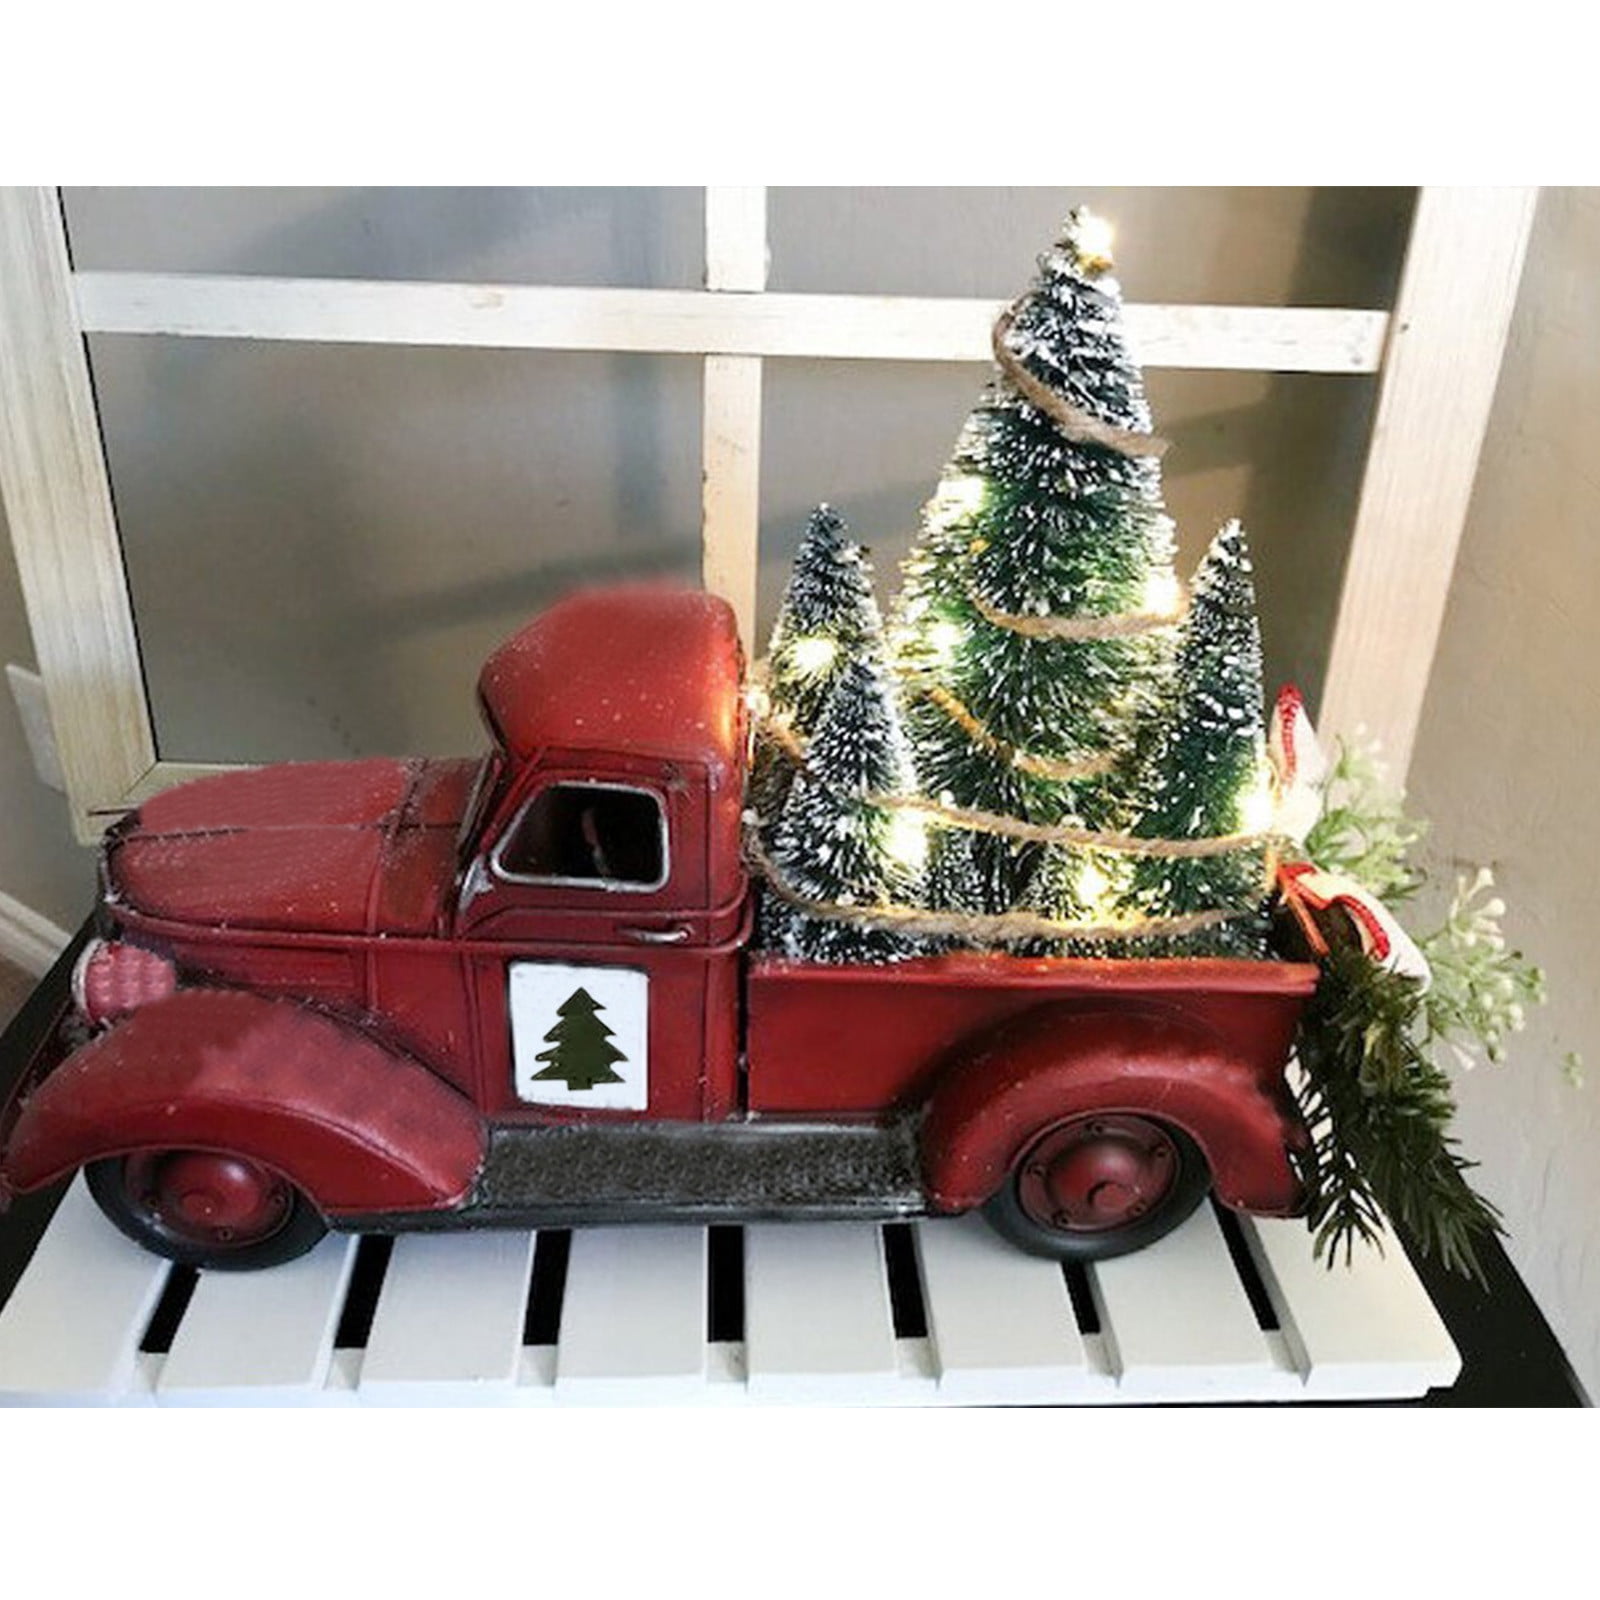 Christmas red truck arrangement-Vintage red truck-red truck centerpiece-Christmas gnome centerpiece-Christmas gift-Holiday display-free ship